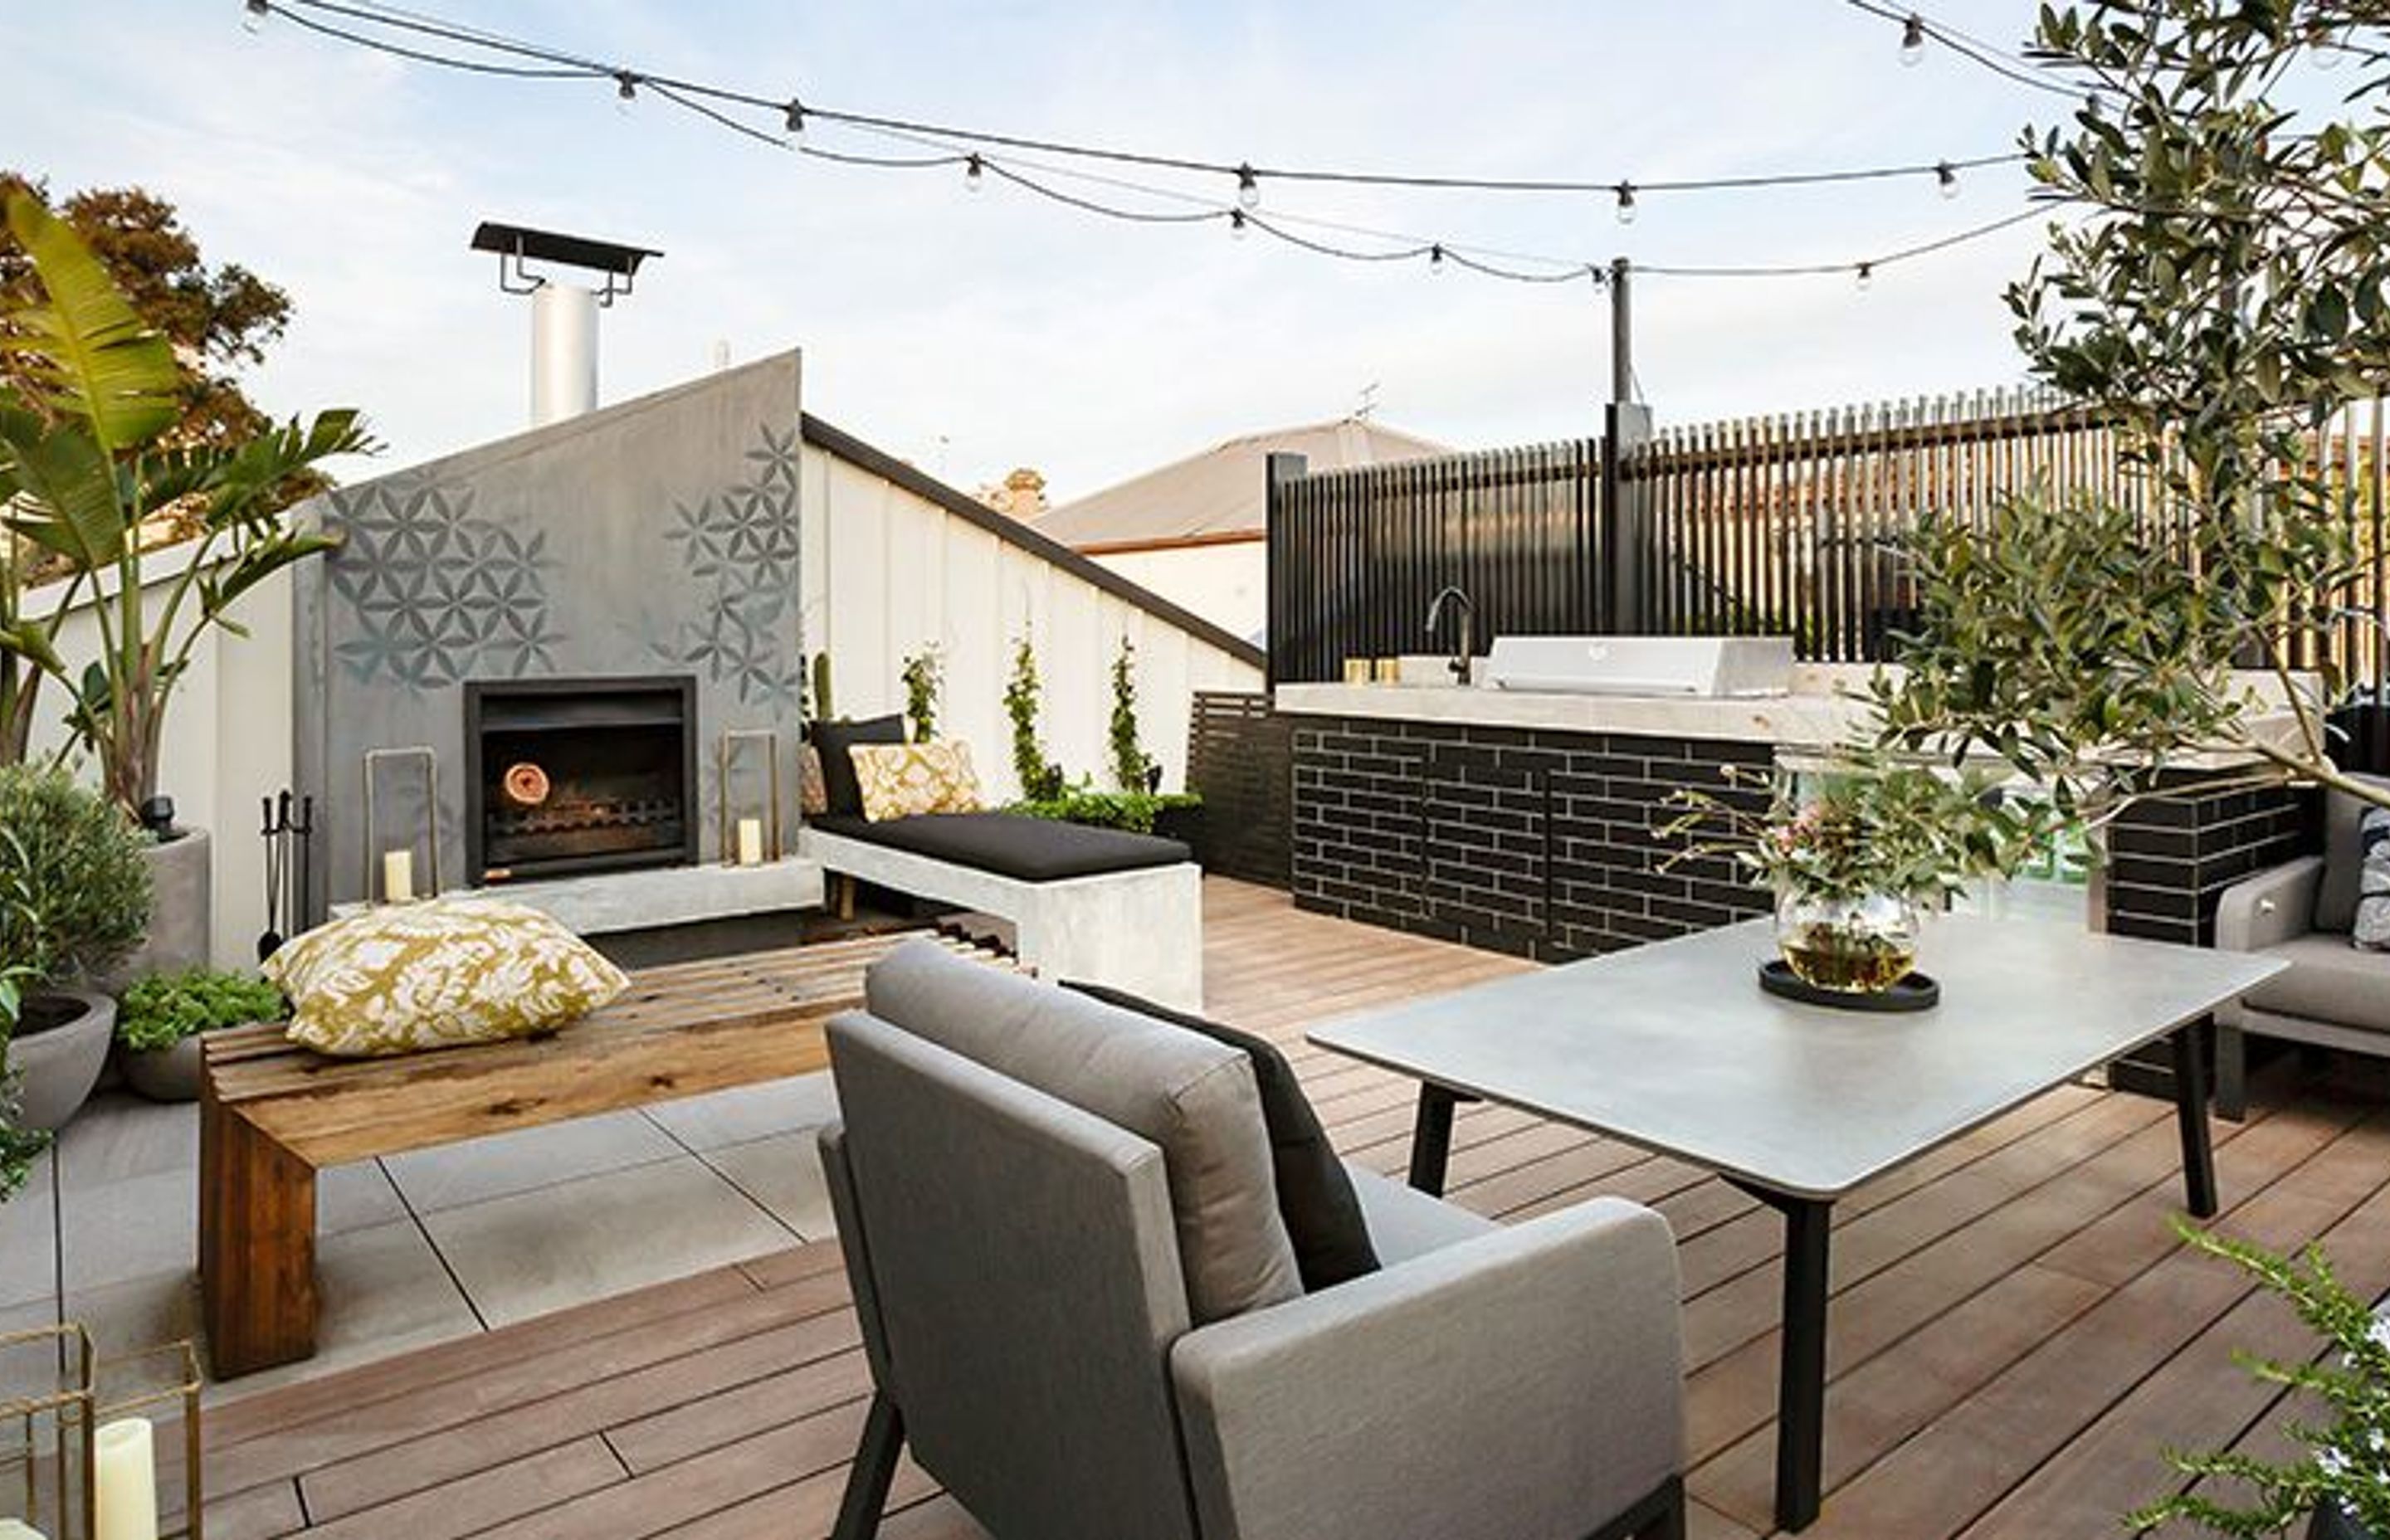 You can check out this outdoor entertainment space here.